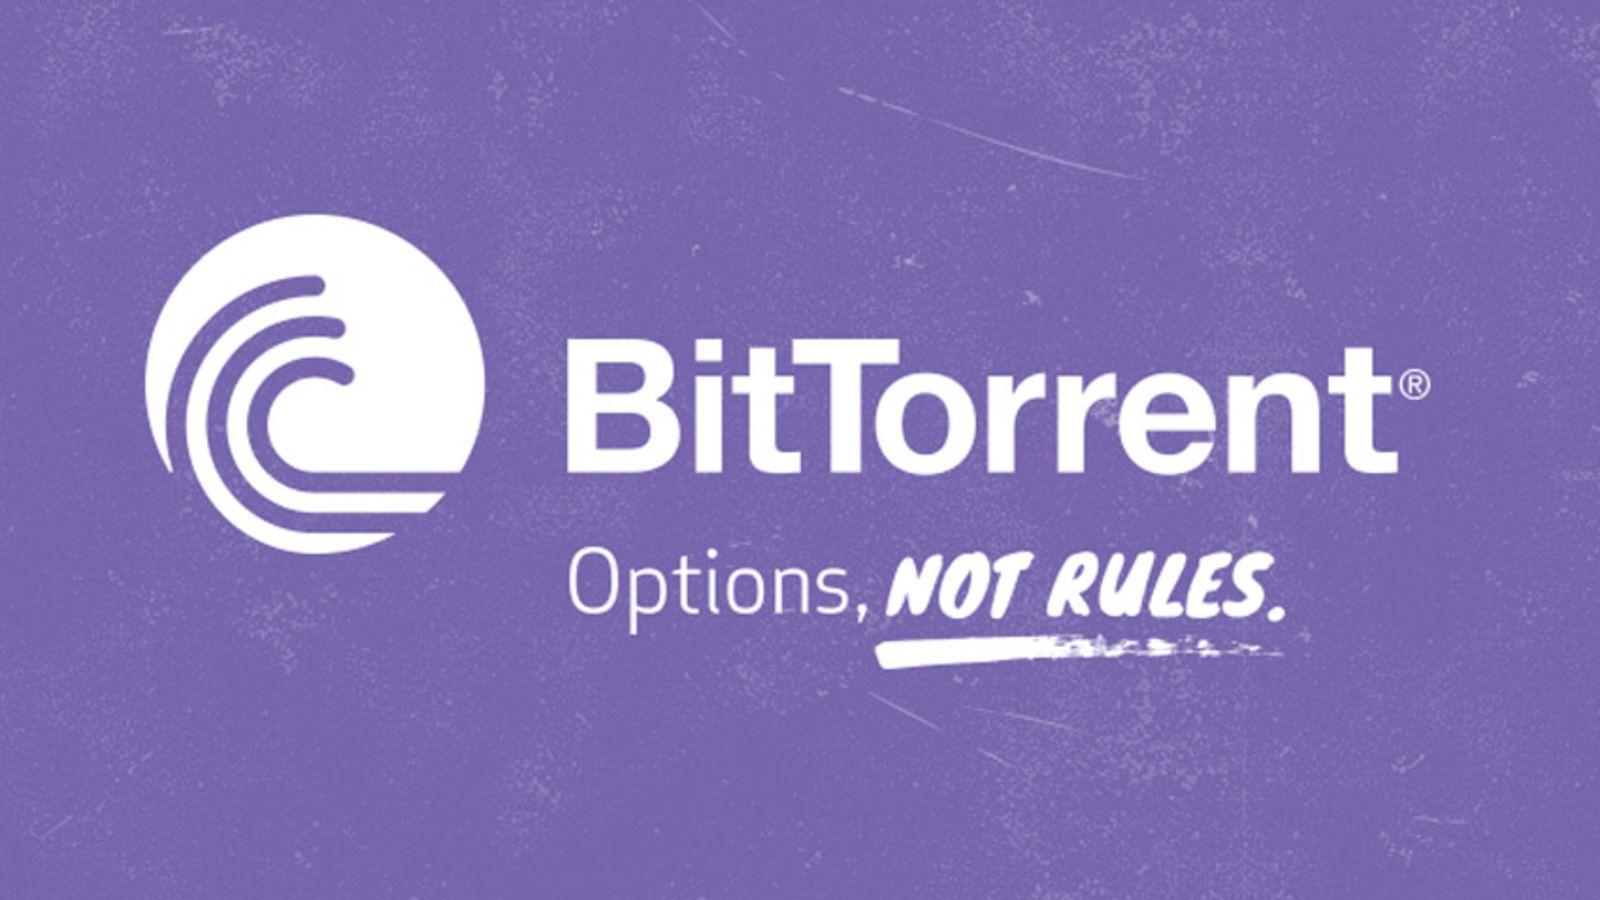 Evident benefits of the BitTorrent web decision